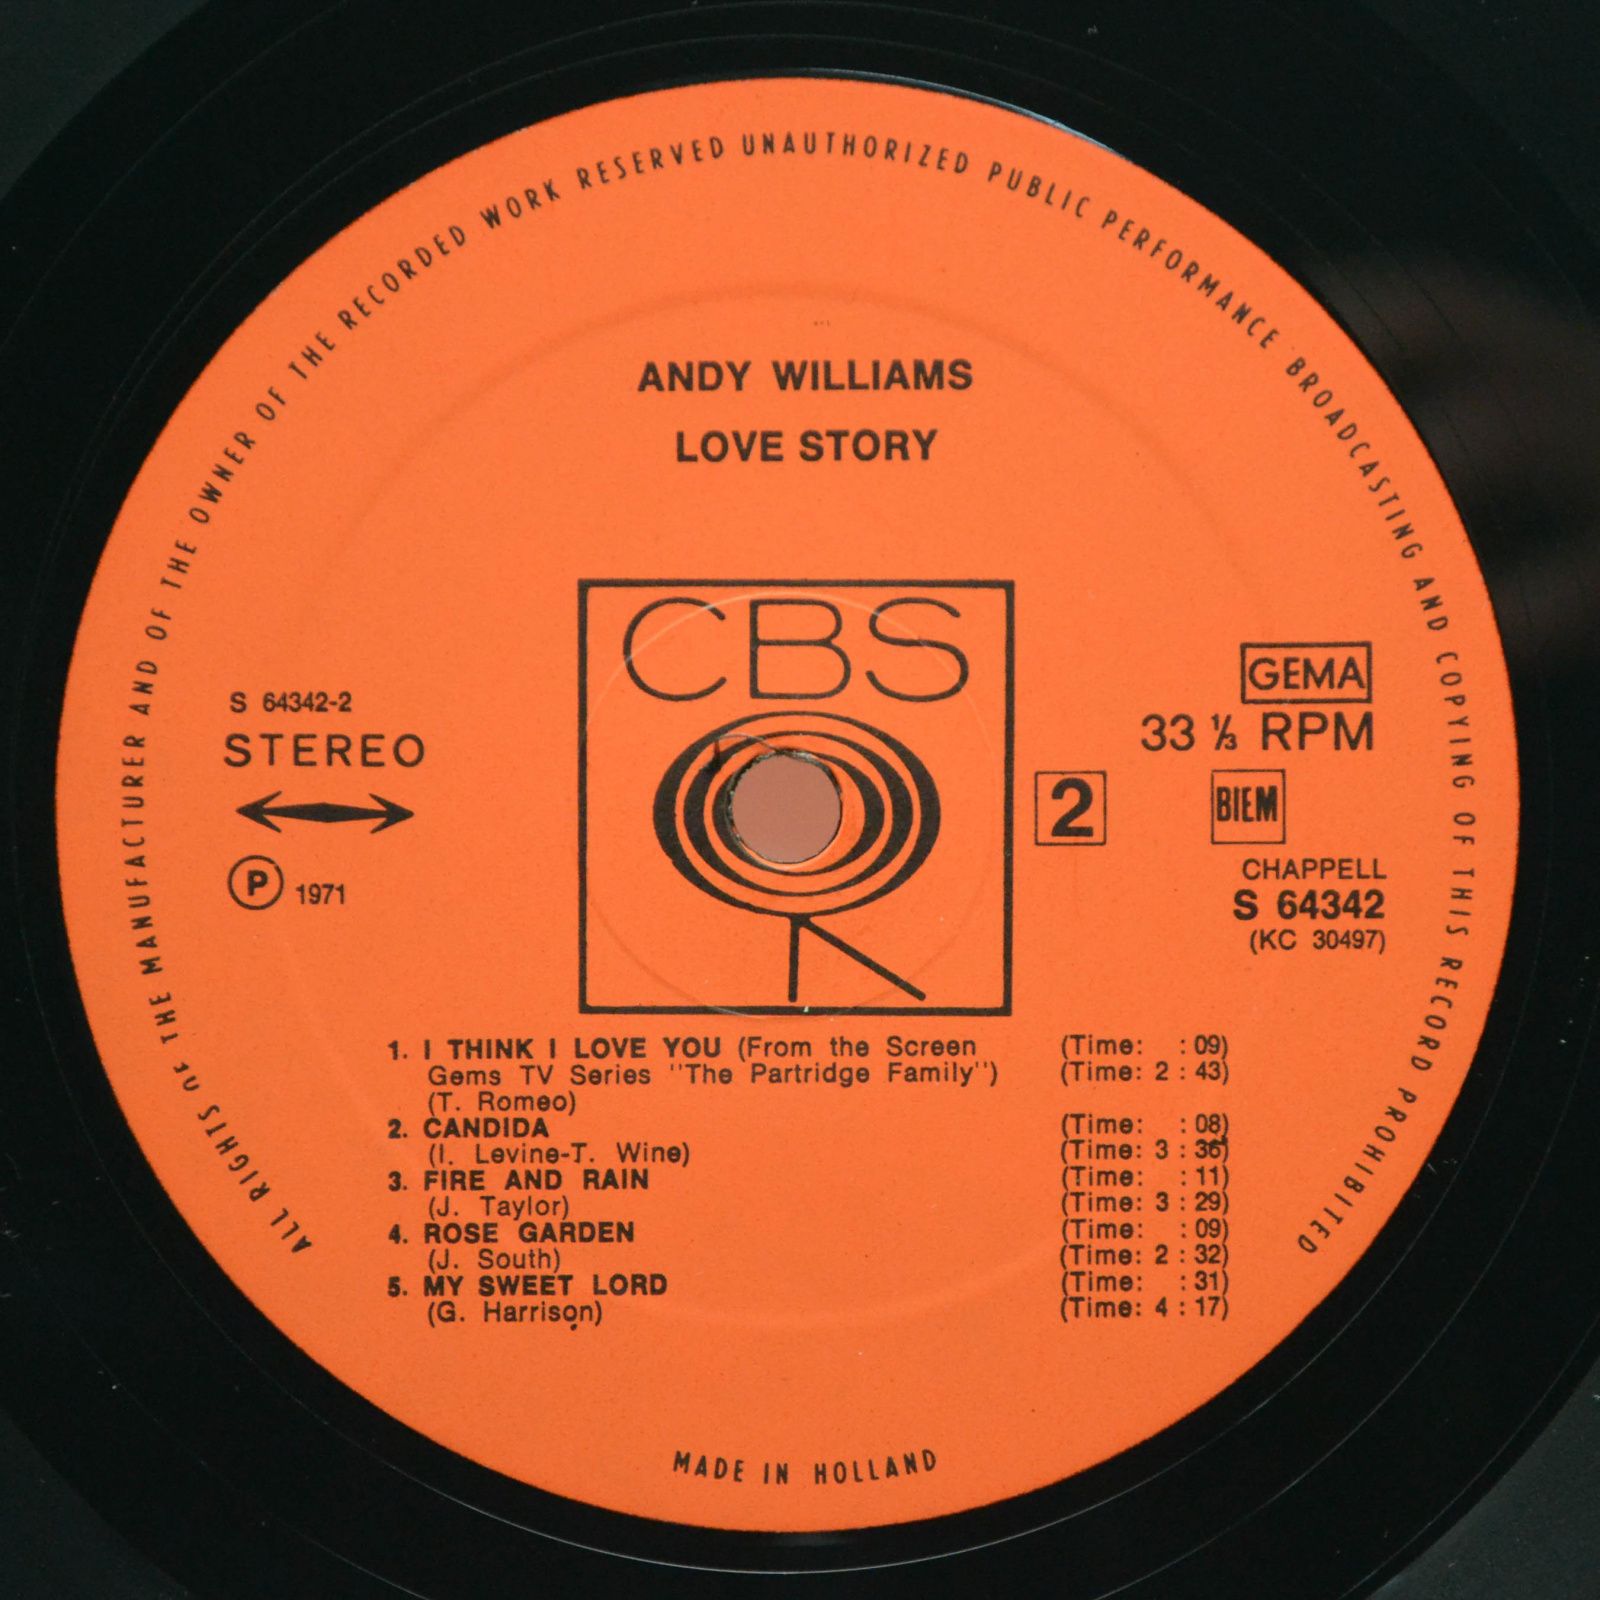 Andy Williams — Love Story, 1971